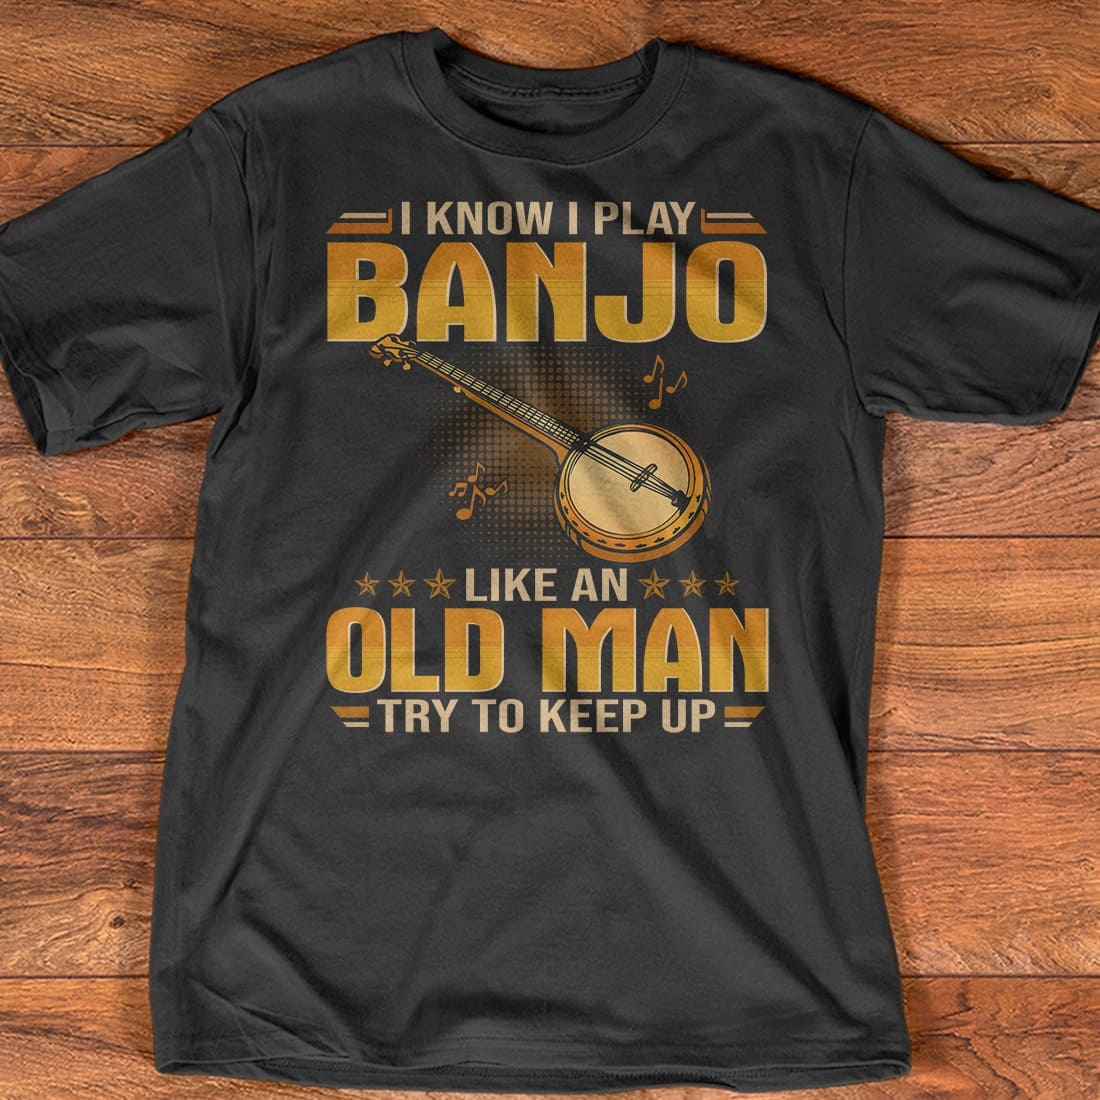 I know I play banjo like an old man try to keep up - Banjo the instrument, African Banjo instrument